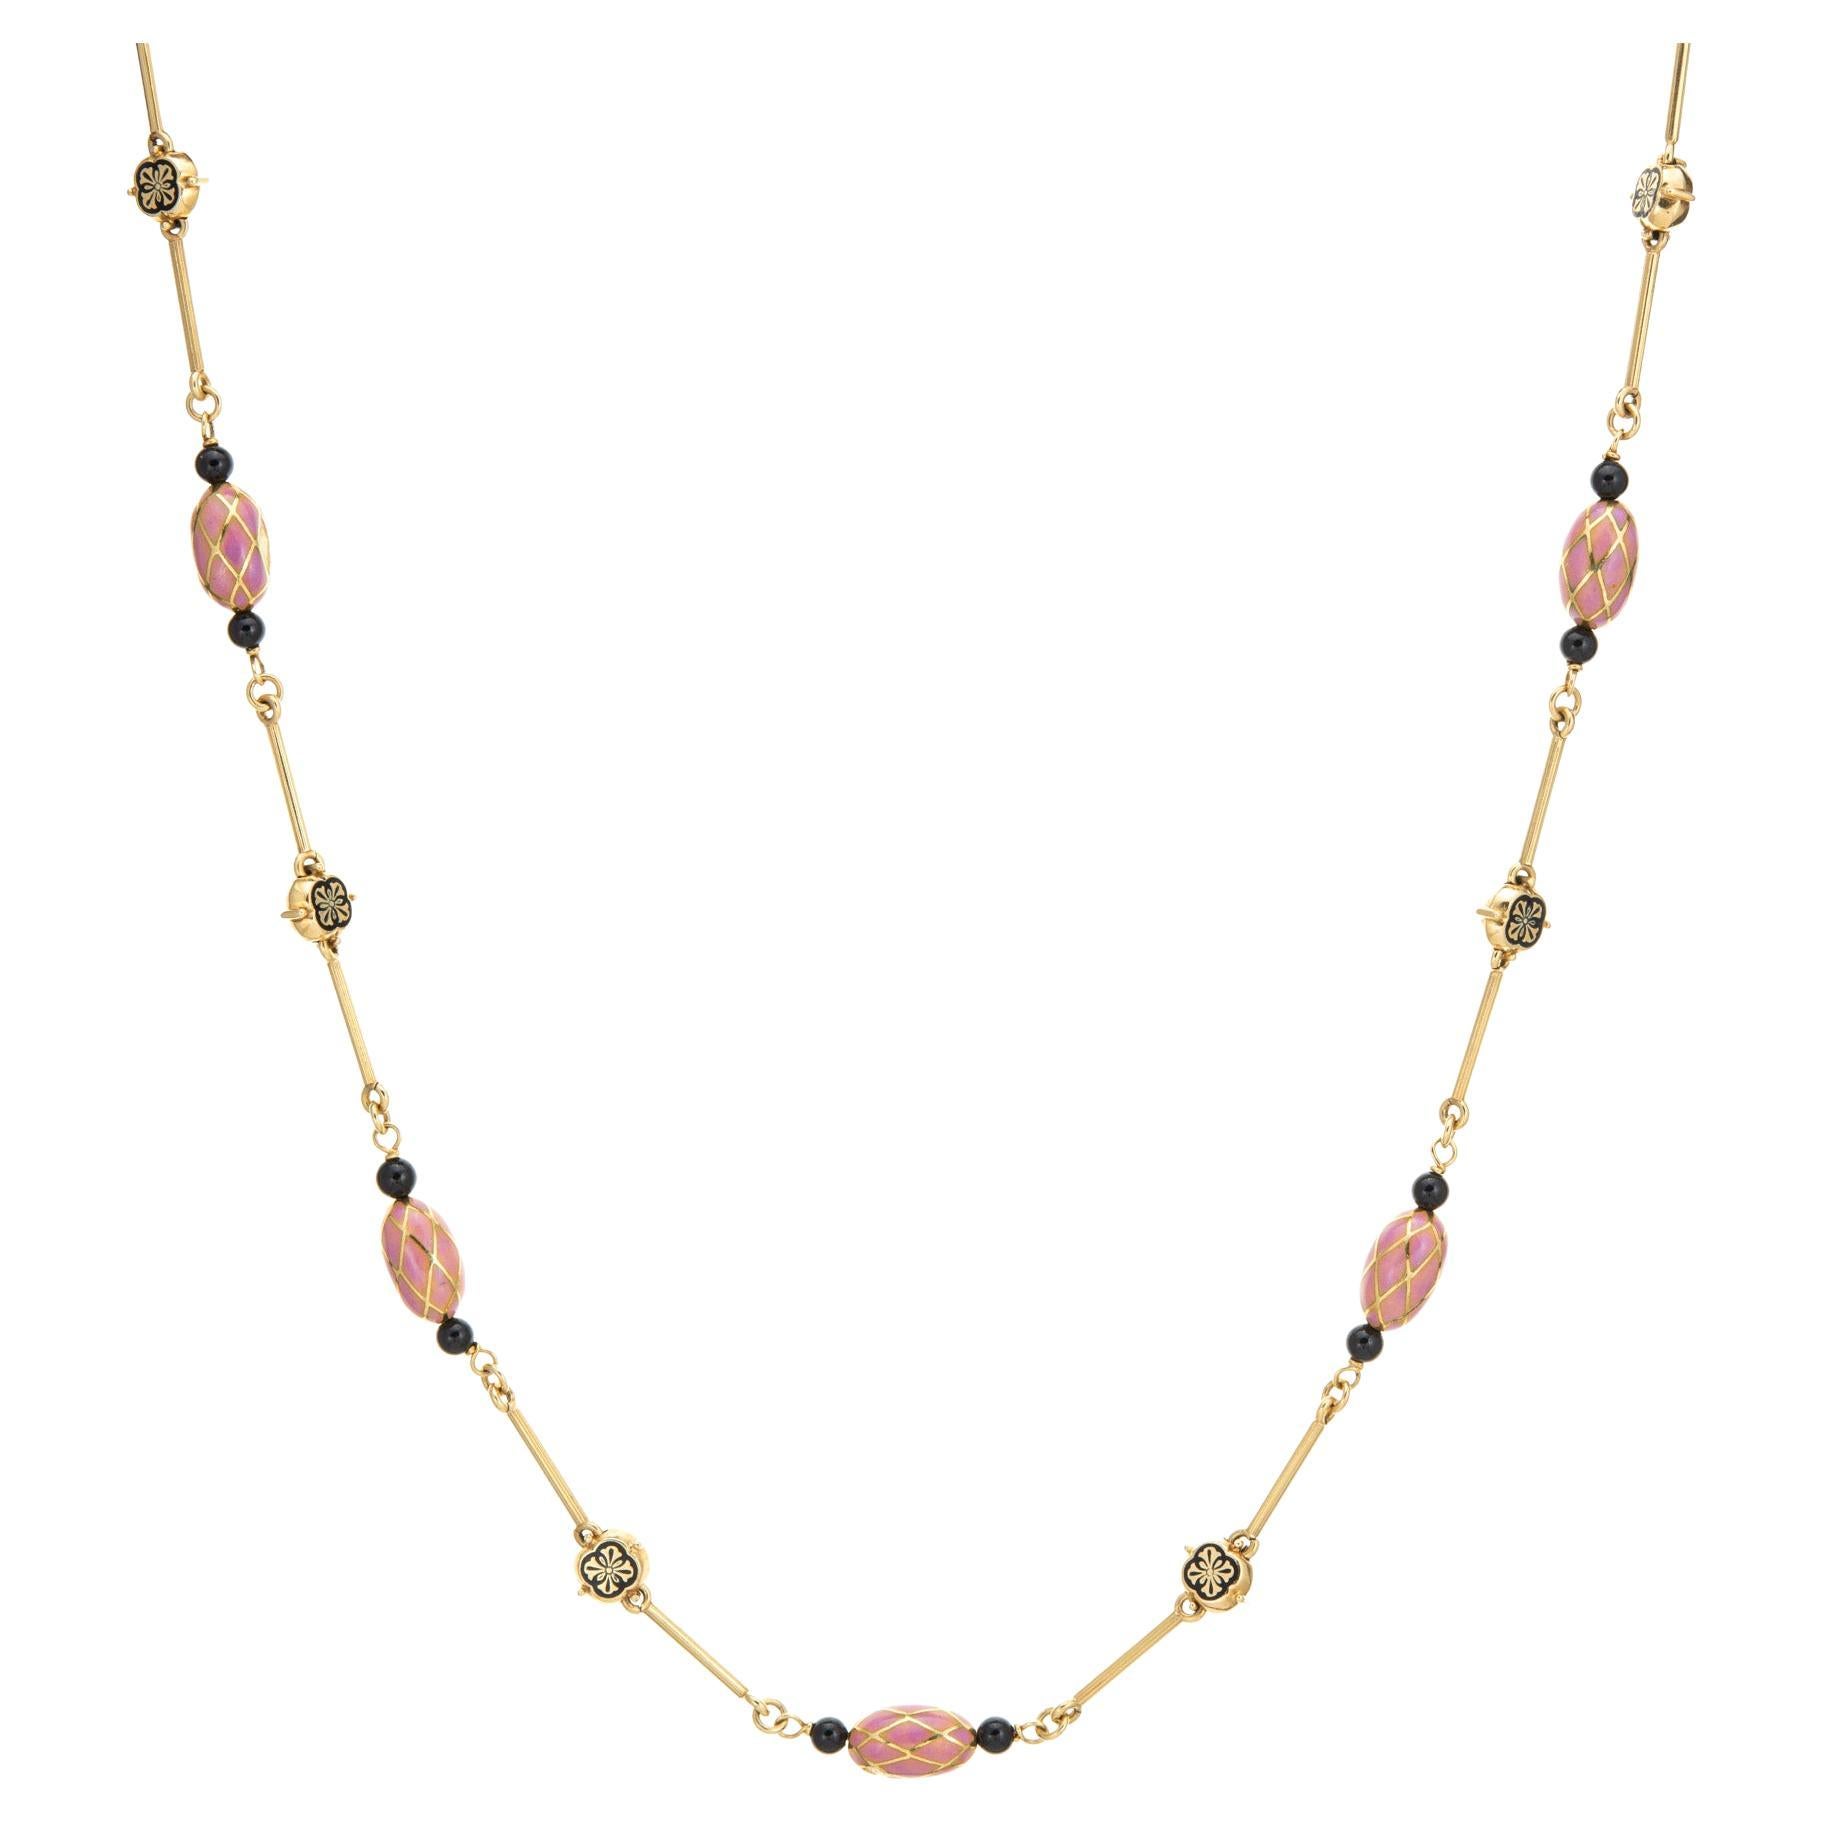 Vintage French Import Enamel Necklace 18k Yellow Gold Long 27" Pink Black Onyx For Sale